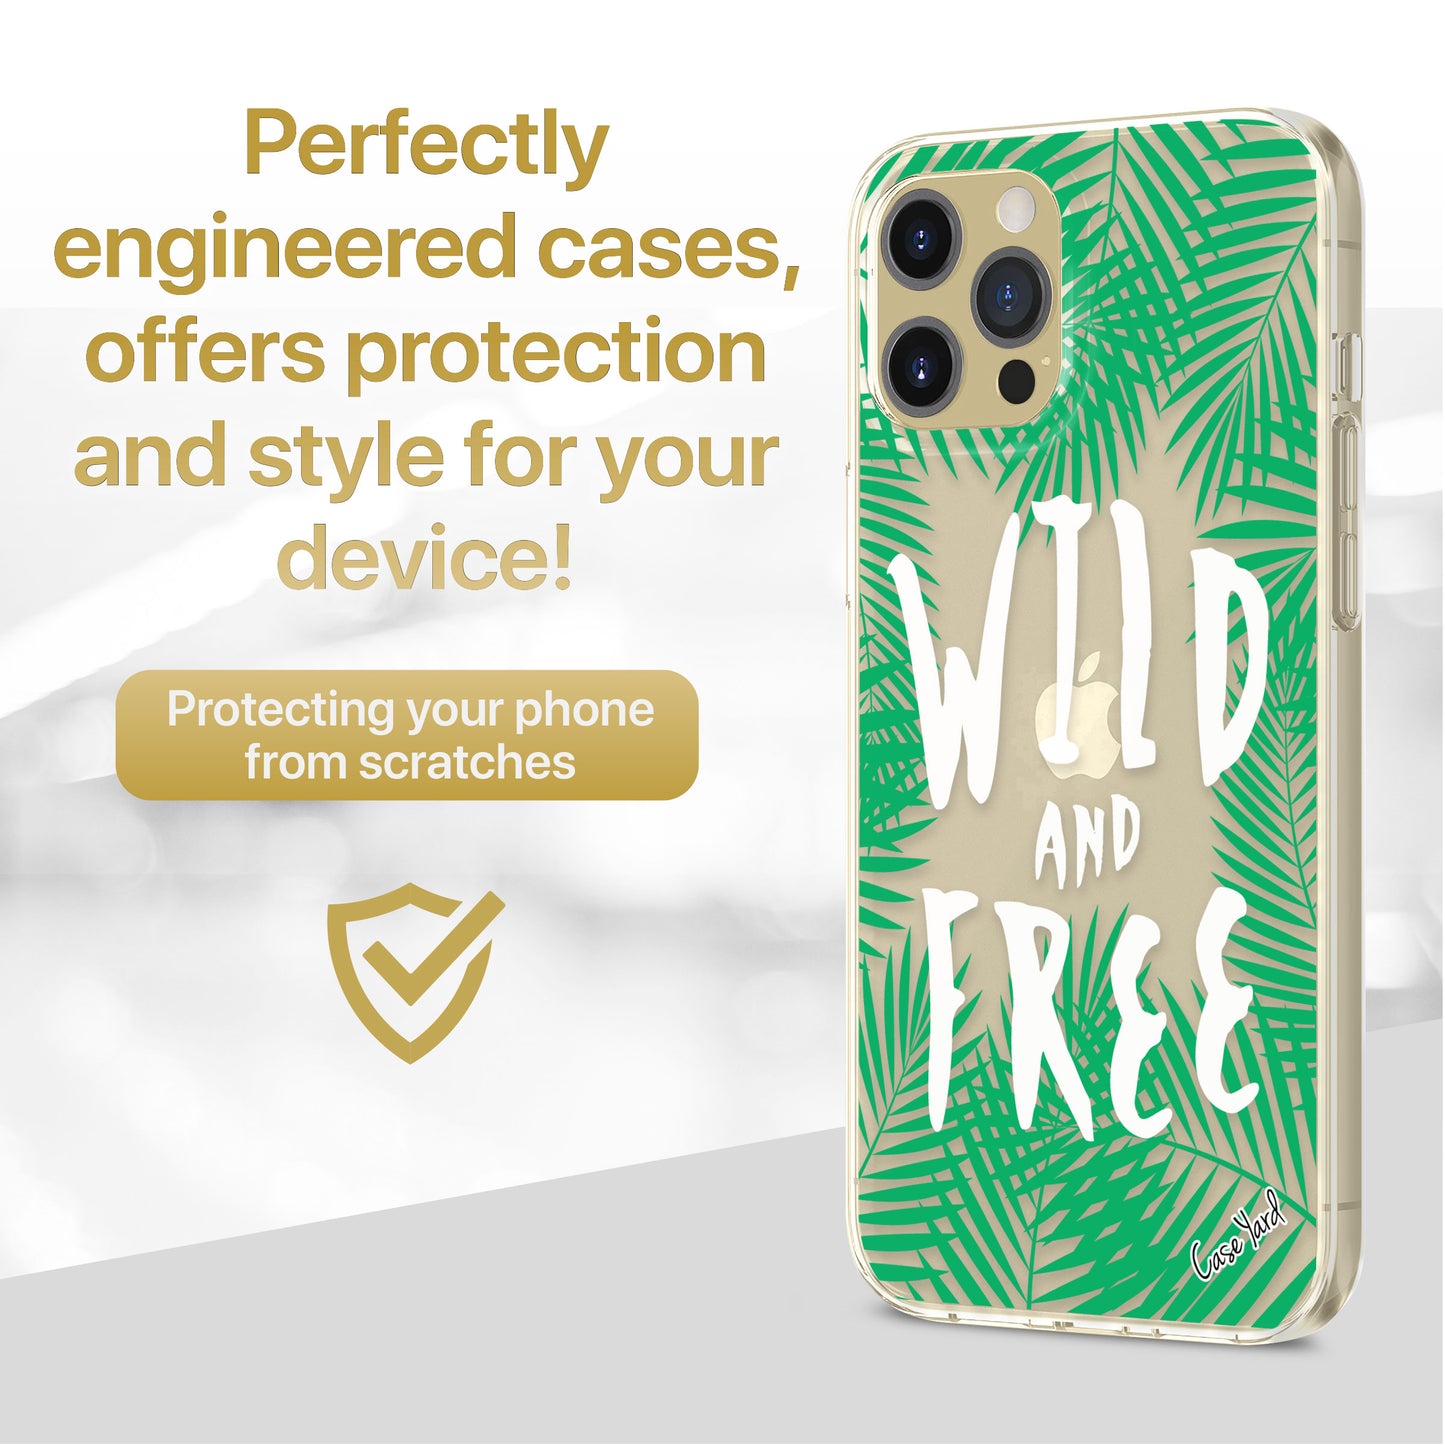 TPU Case Clear case with (Wild & Free Palm Tree) Design for iPhone & Samsung Phones